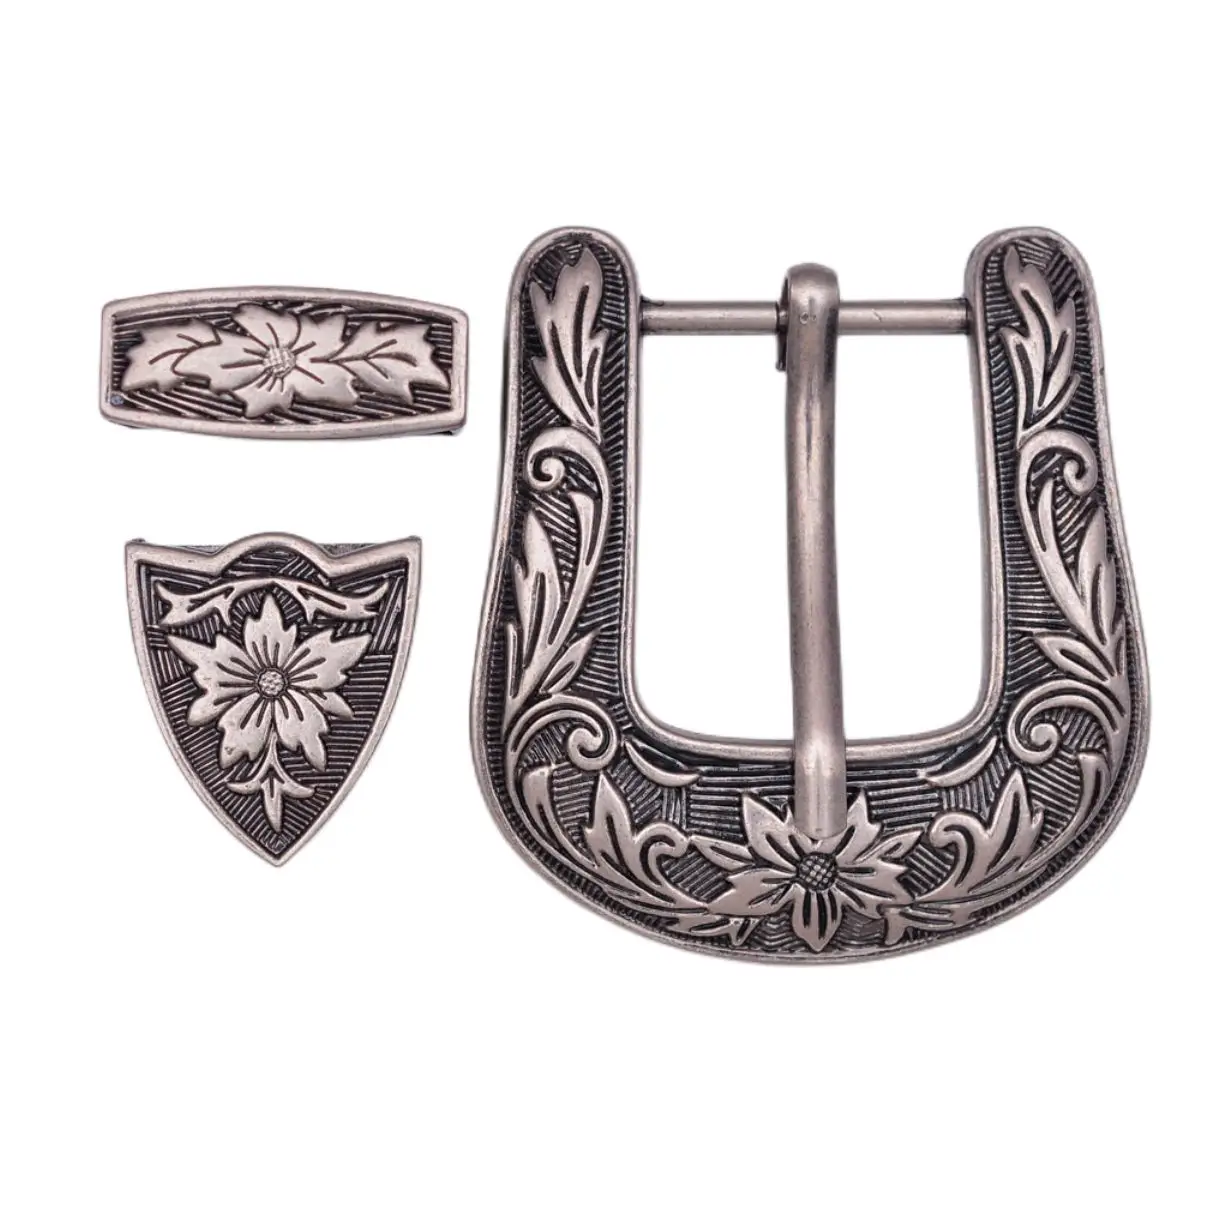 

Western Cowboy Cowgirl Rodeo 3PCS Set Antique Silver Floral Engraved Replacement Jeans Leather Belt Buckle Fit 1" Belt Strap